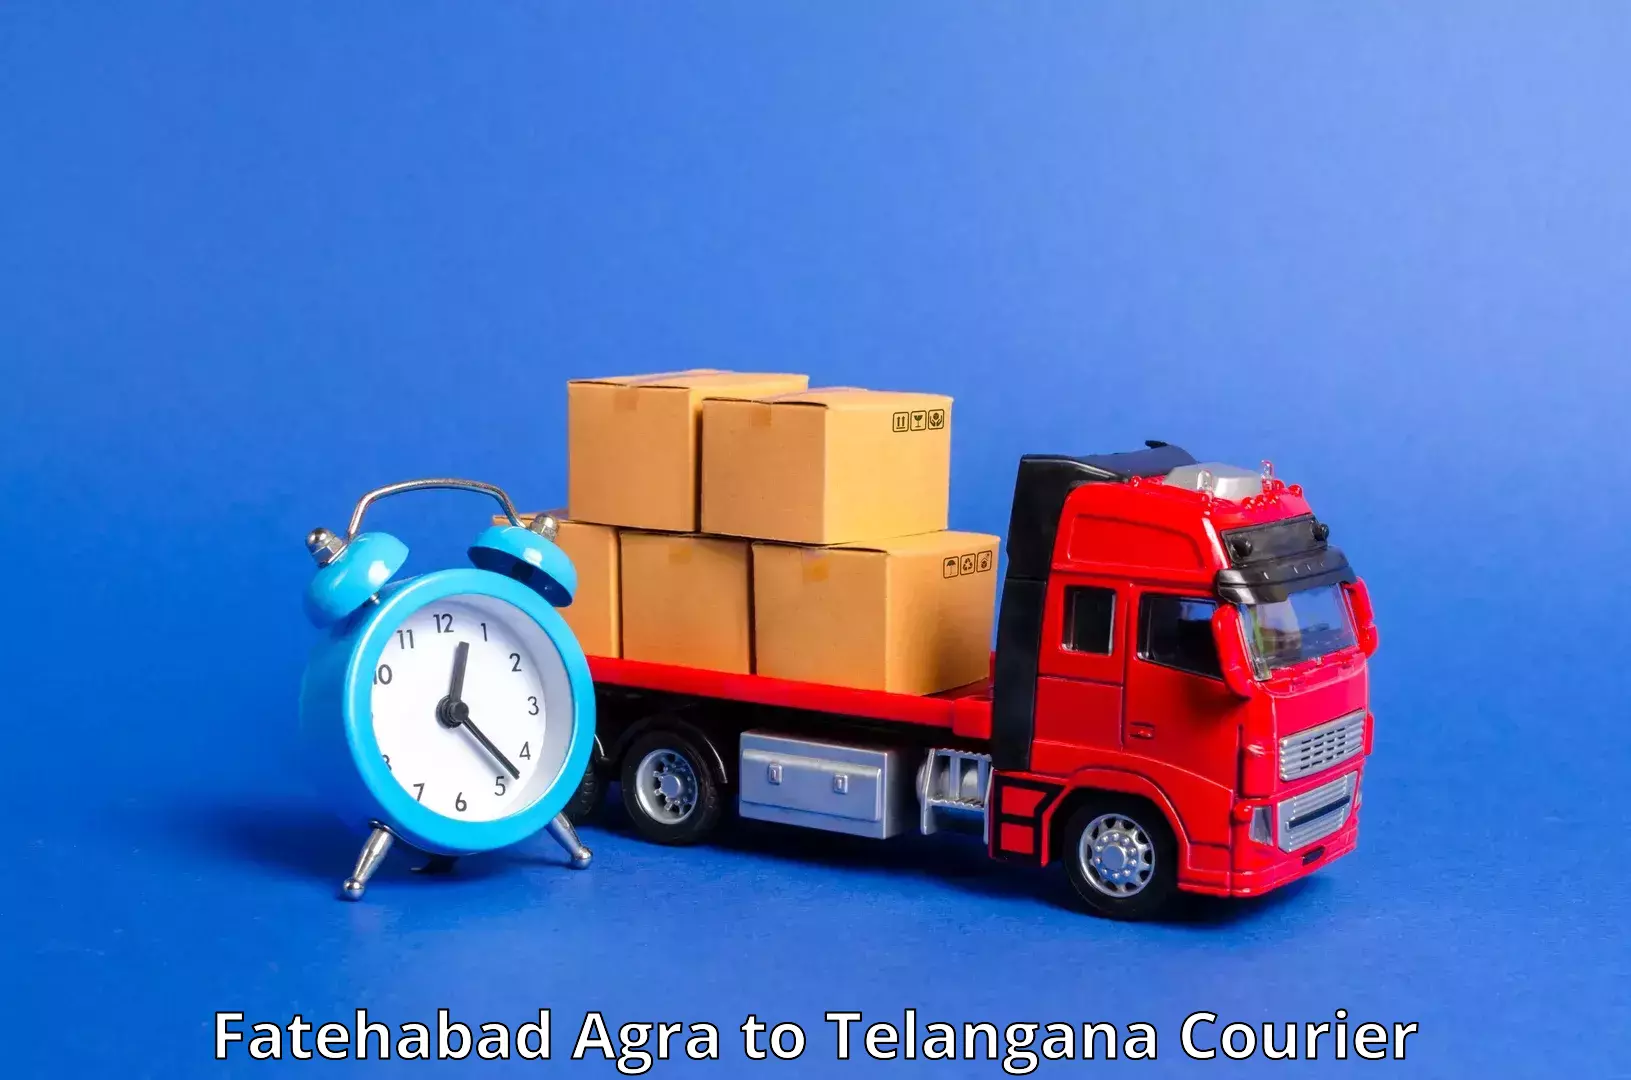 Long distance courier Fatehabad Agra to Hyderabad